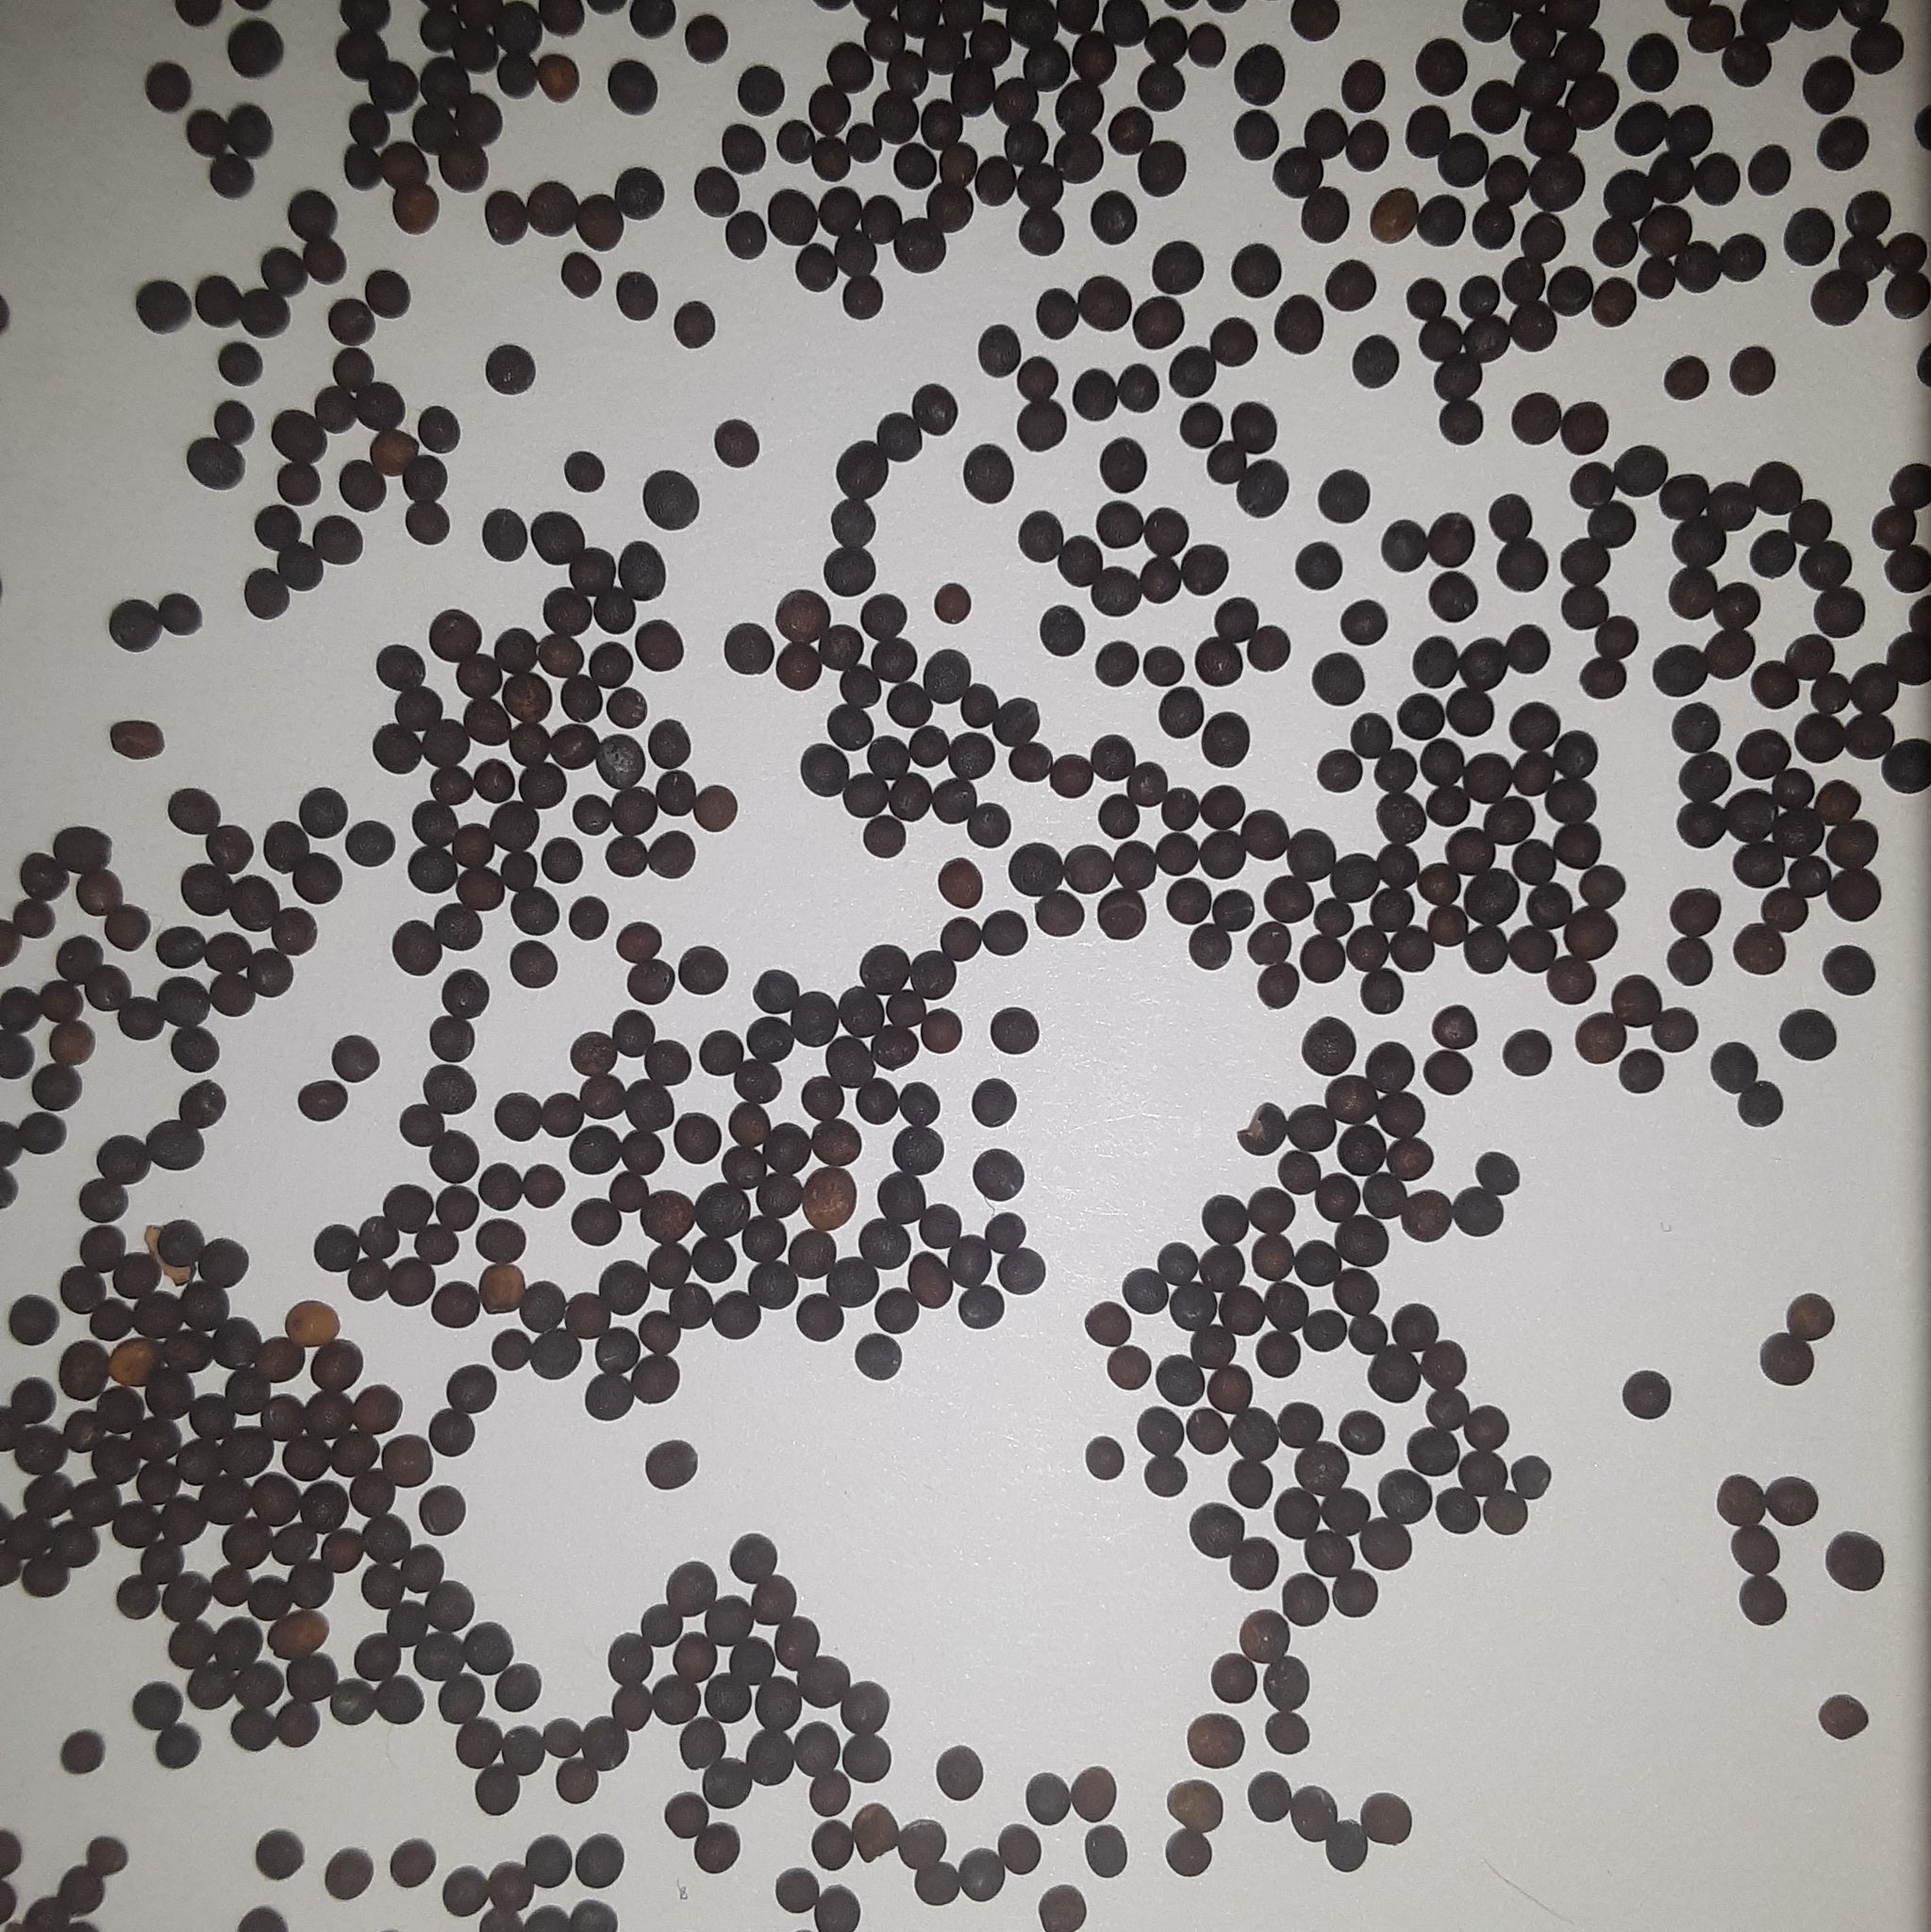 Southern Giant Curled Mustard Seeds